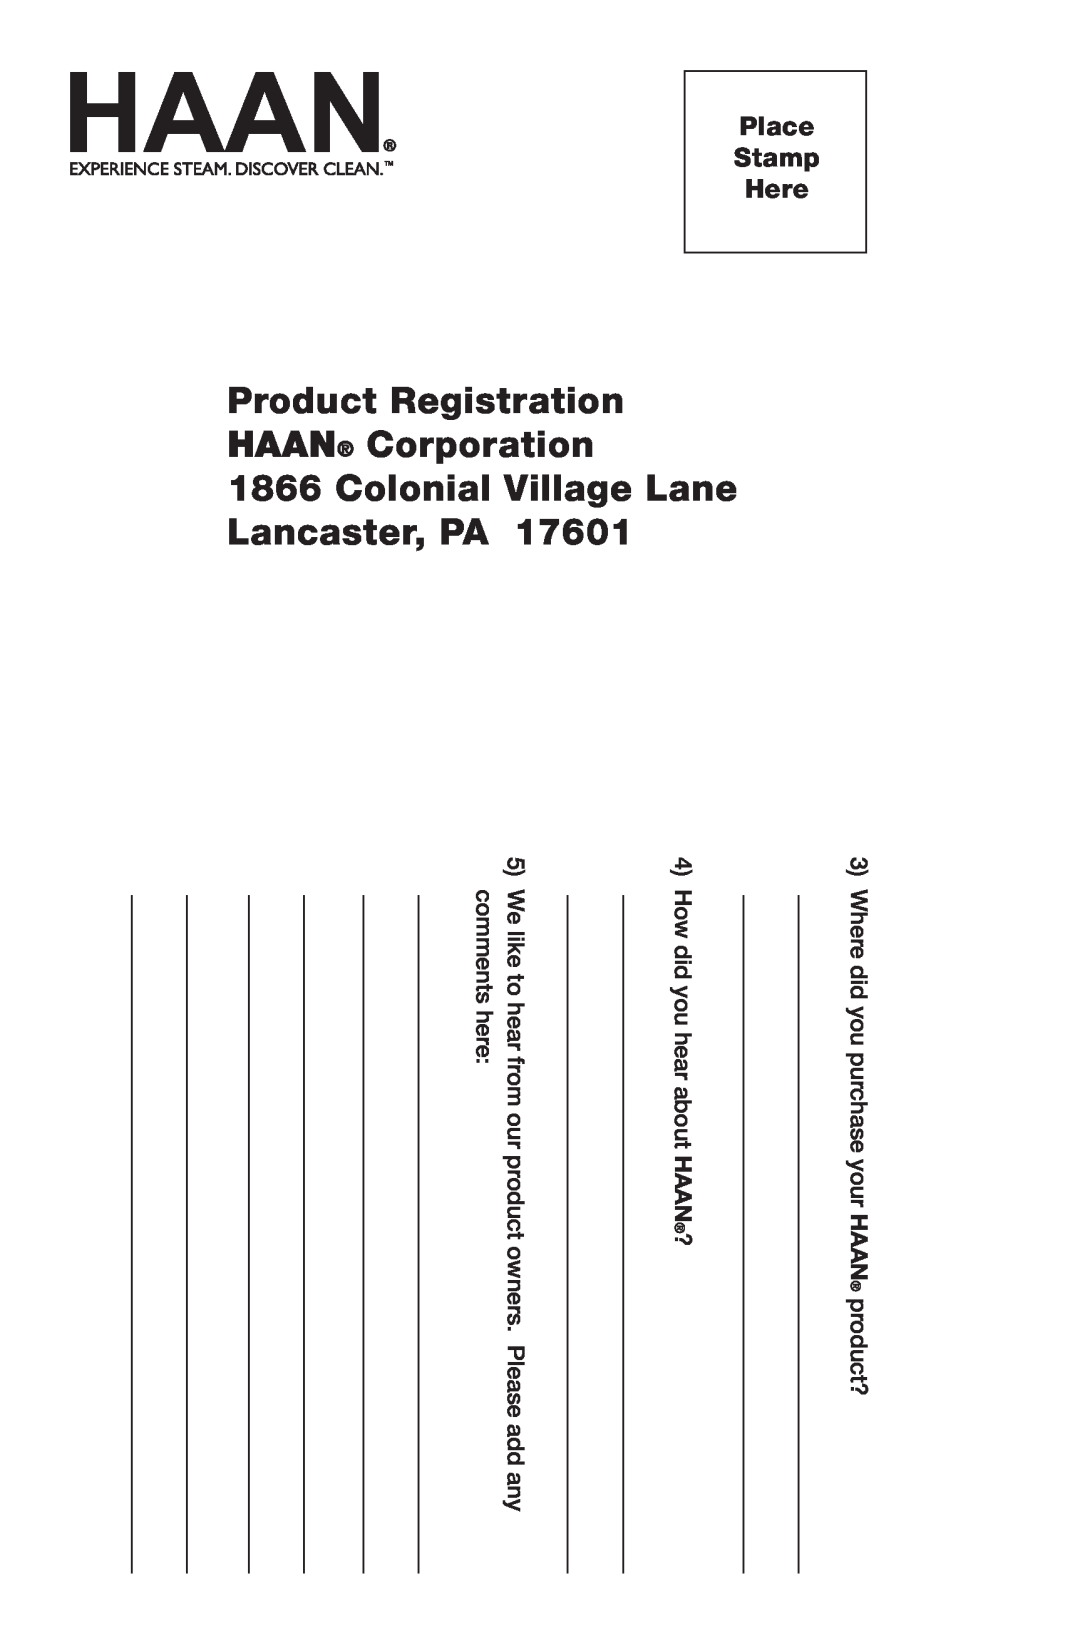 Haan SI-70 instruction manual Product Registration HAAN Corporation, Colonial Village Lane Lancaster, PA, Place Stamp Here 